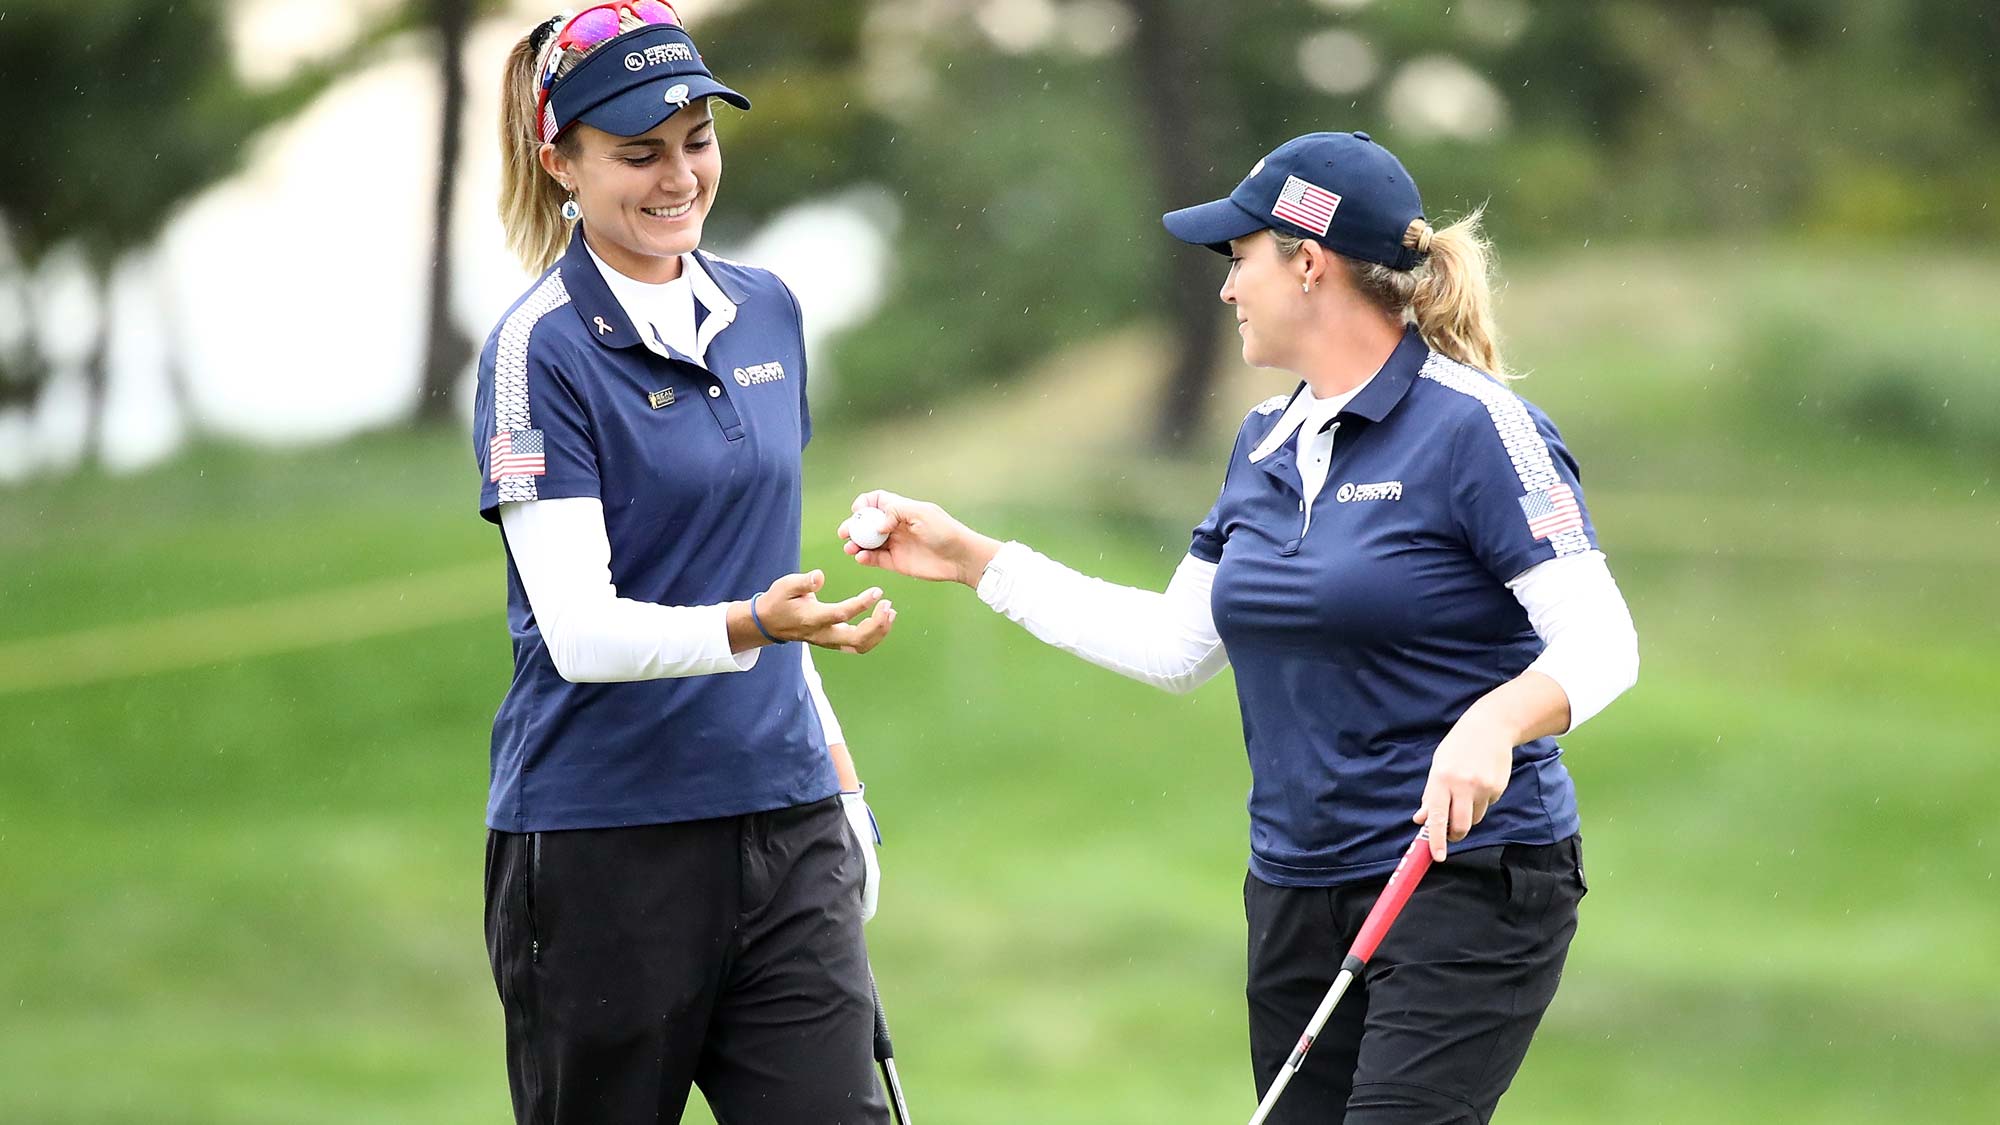 Lexi Thompson (L) and Cristie Kerr (R) of the United States celebrate on the 2nd green during the Pool B match between USA and Thailand on day two of the UL International Crown